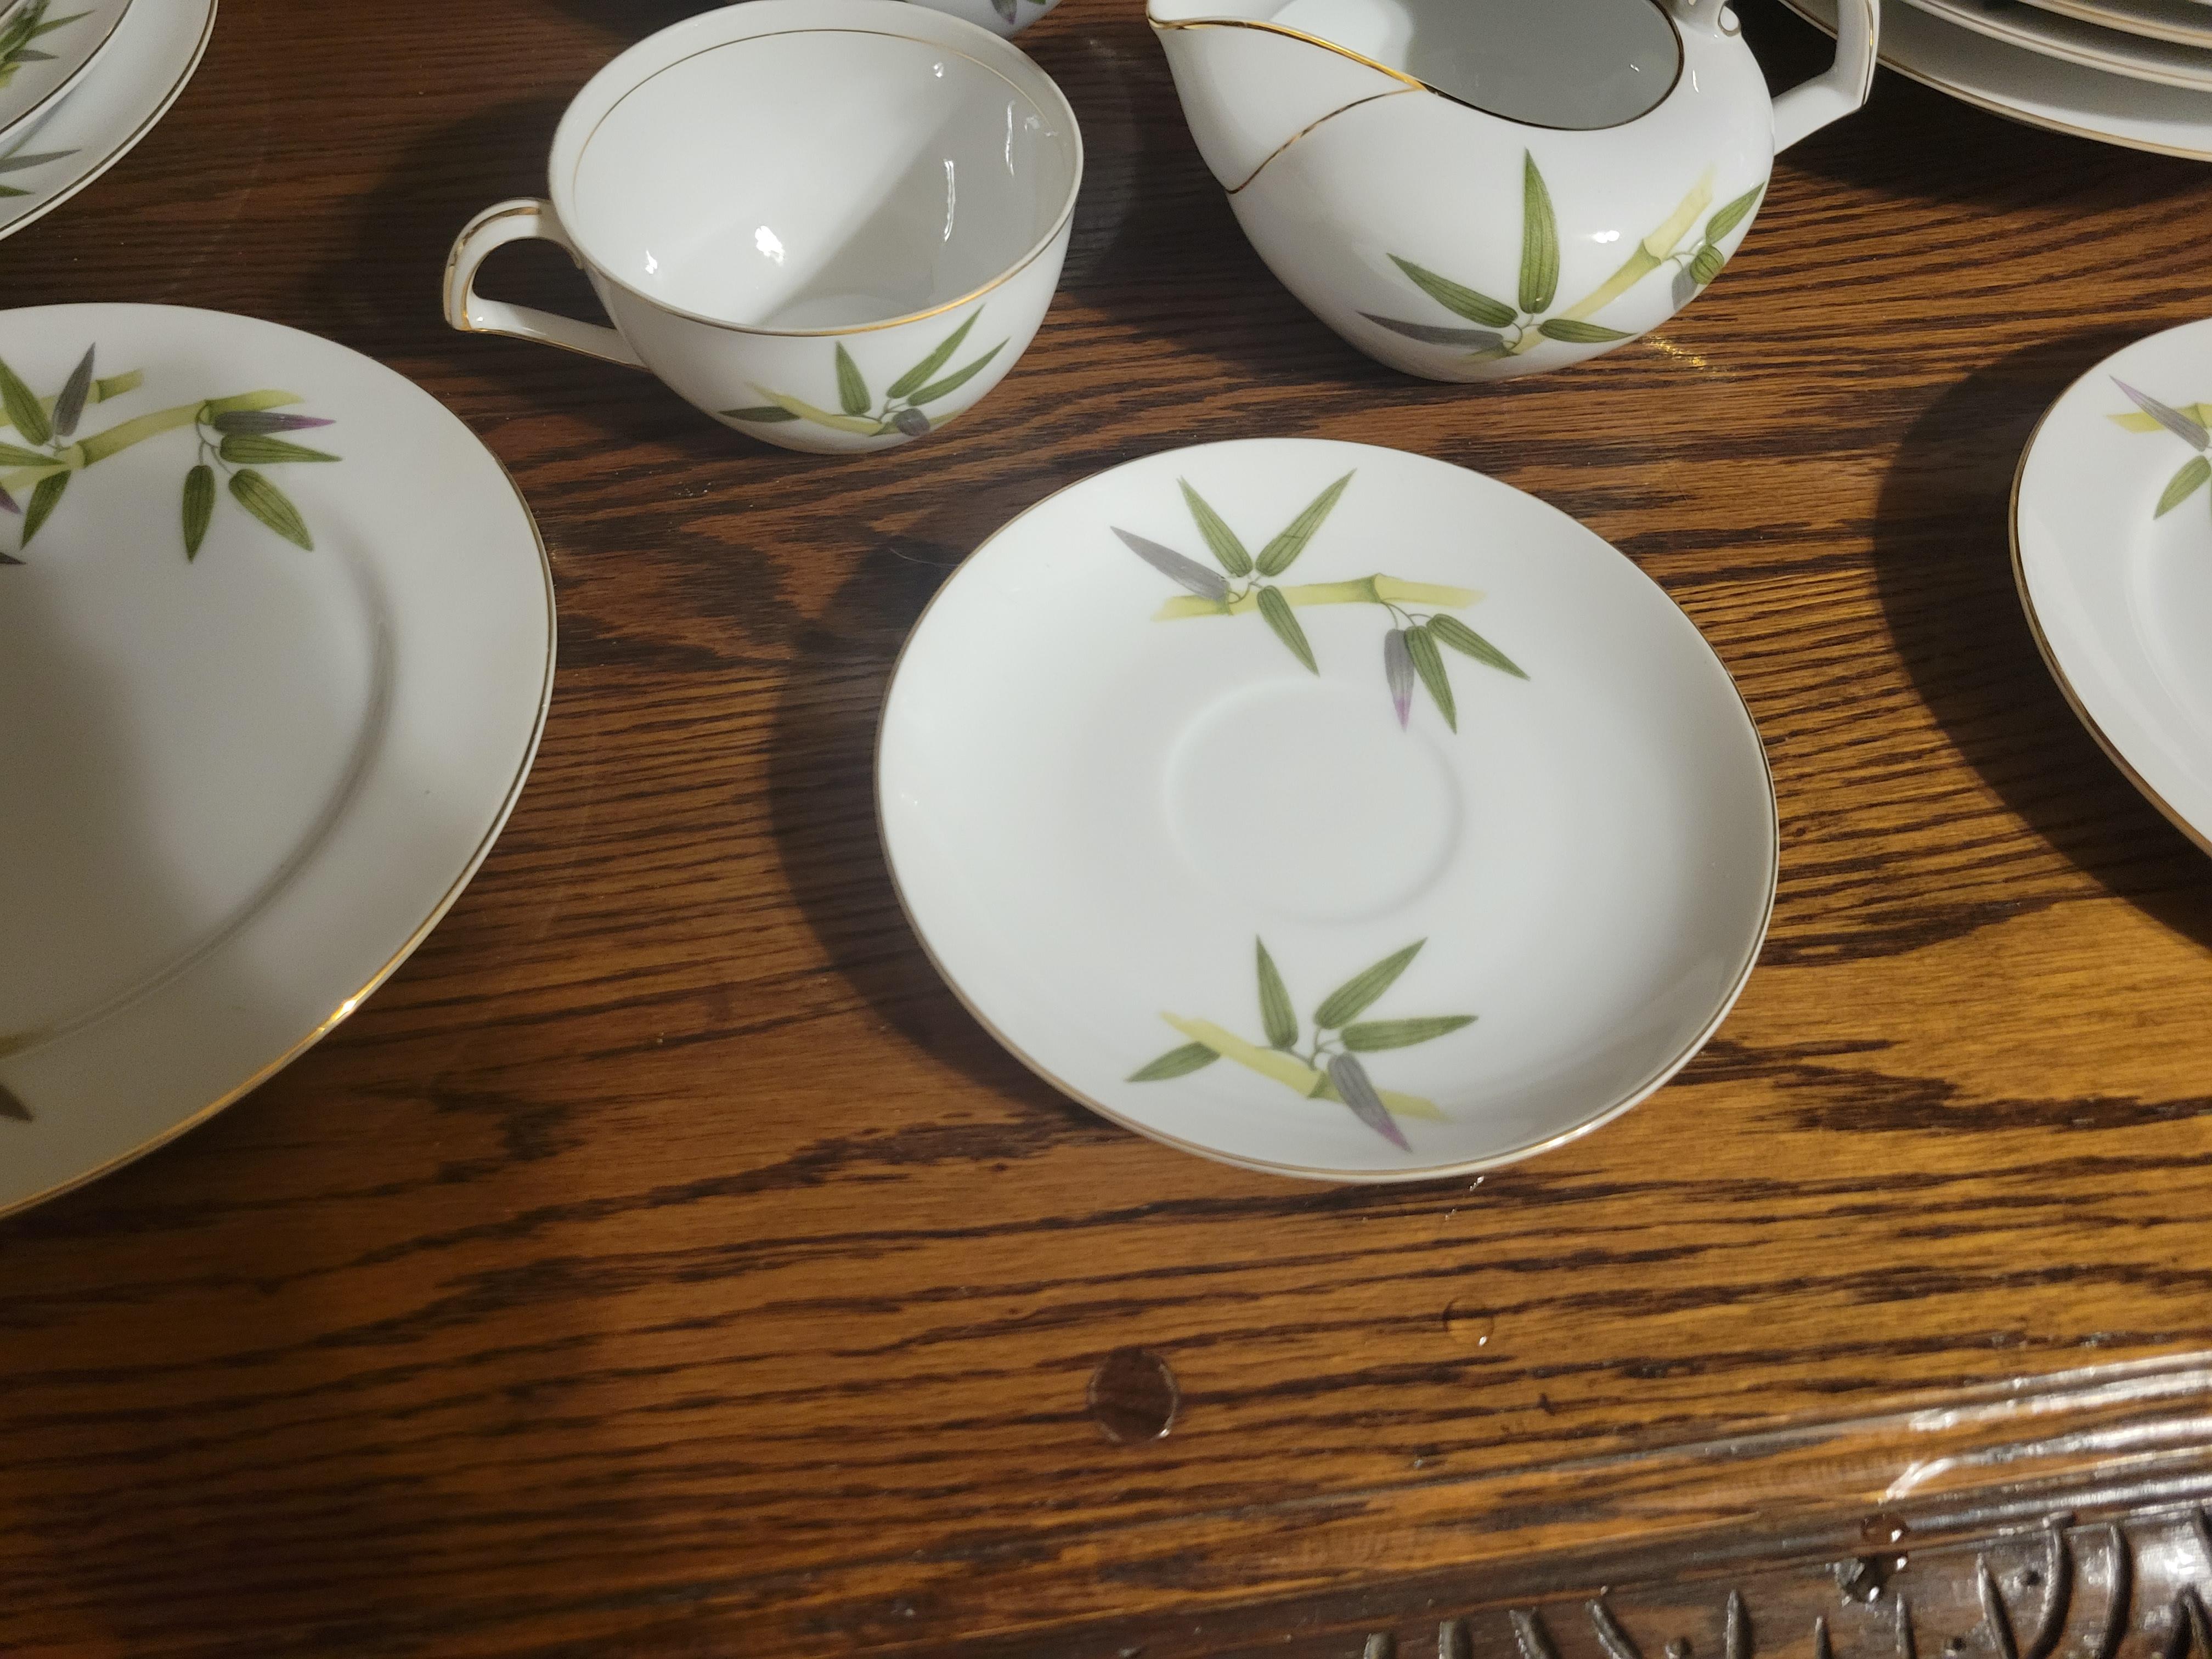 1951 Narumi Japan 'Spring Bamboo' Fine China Set - 24 pieces plus replacements  For Sale 6